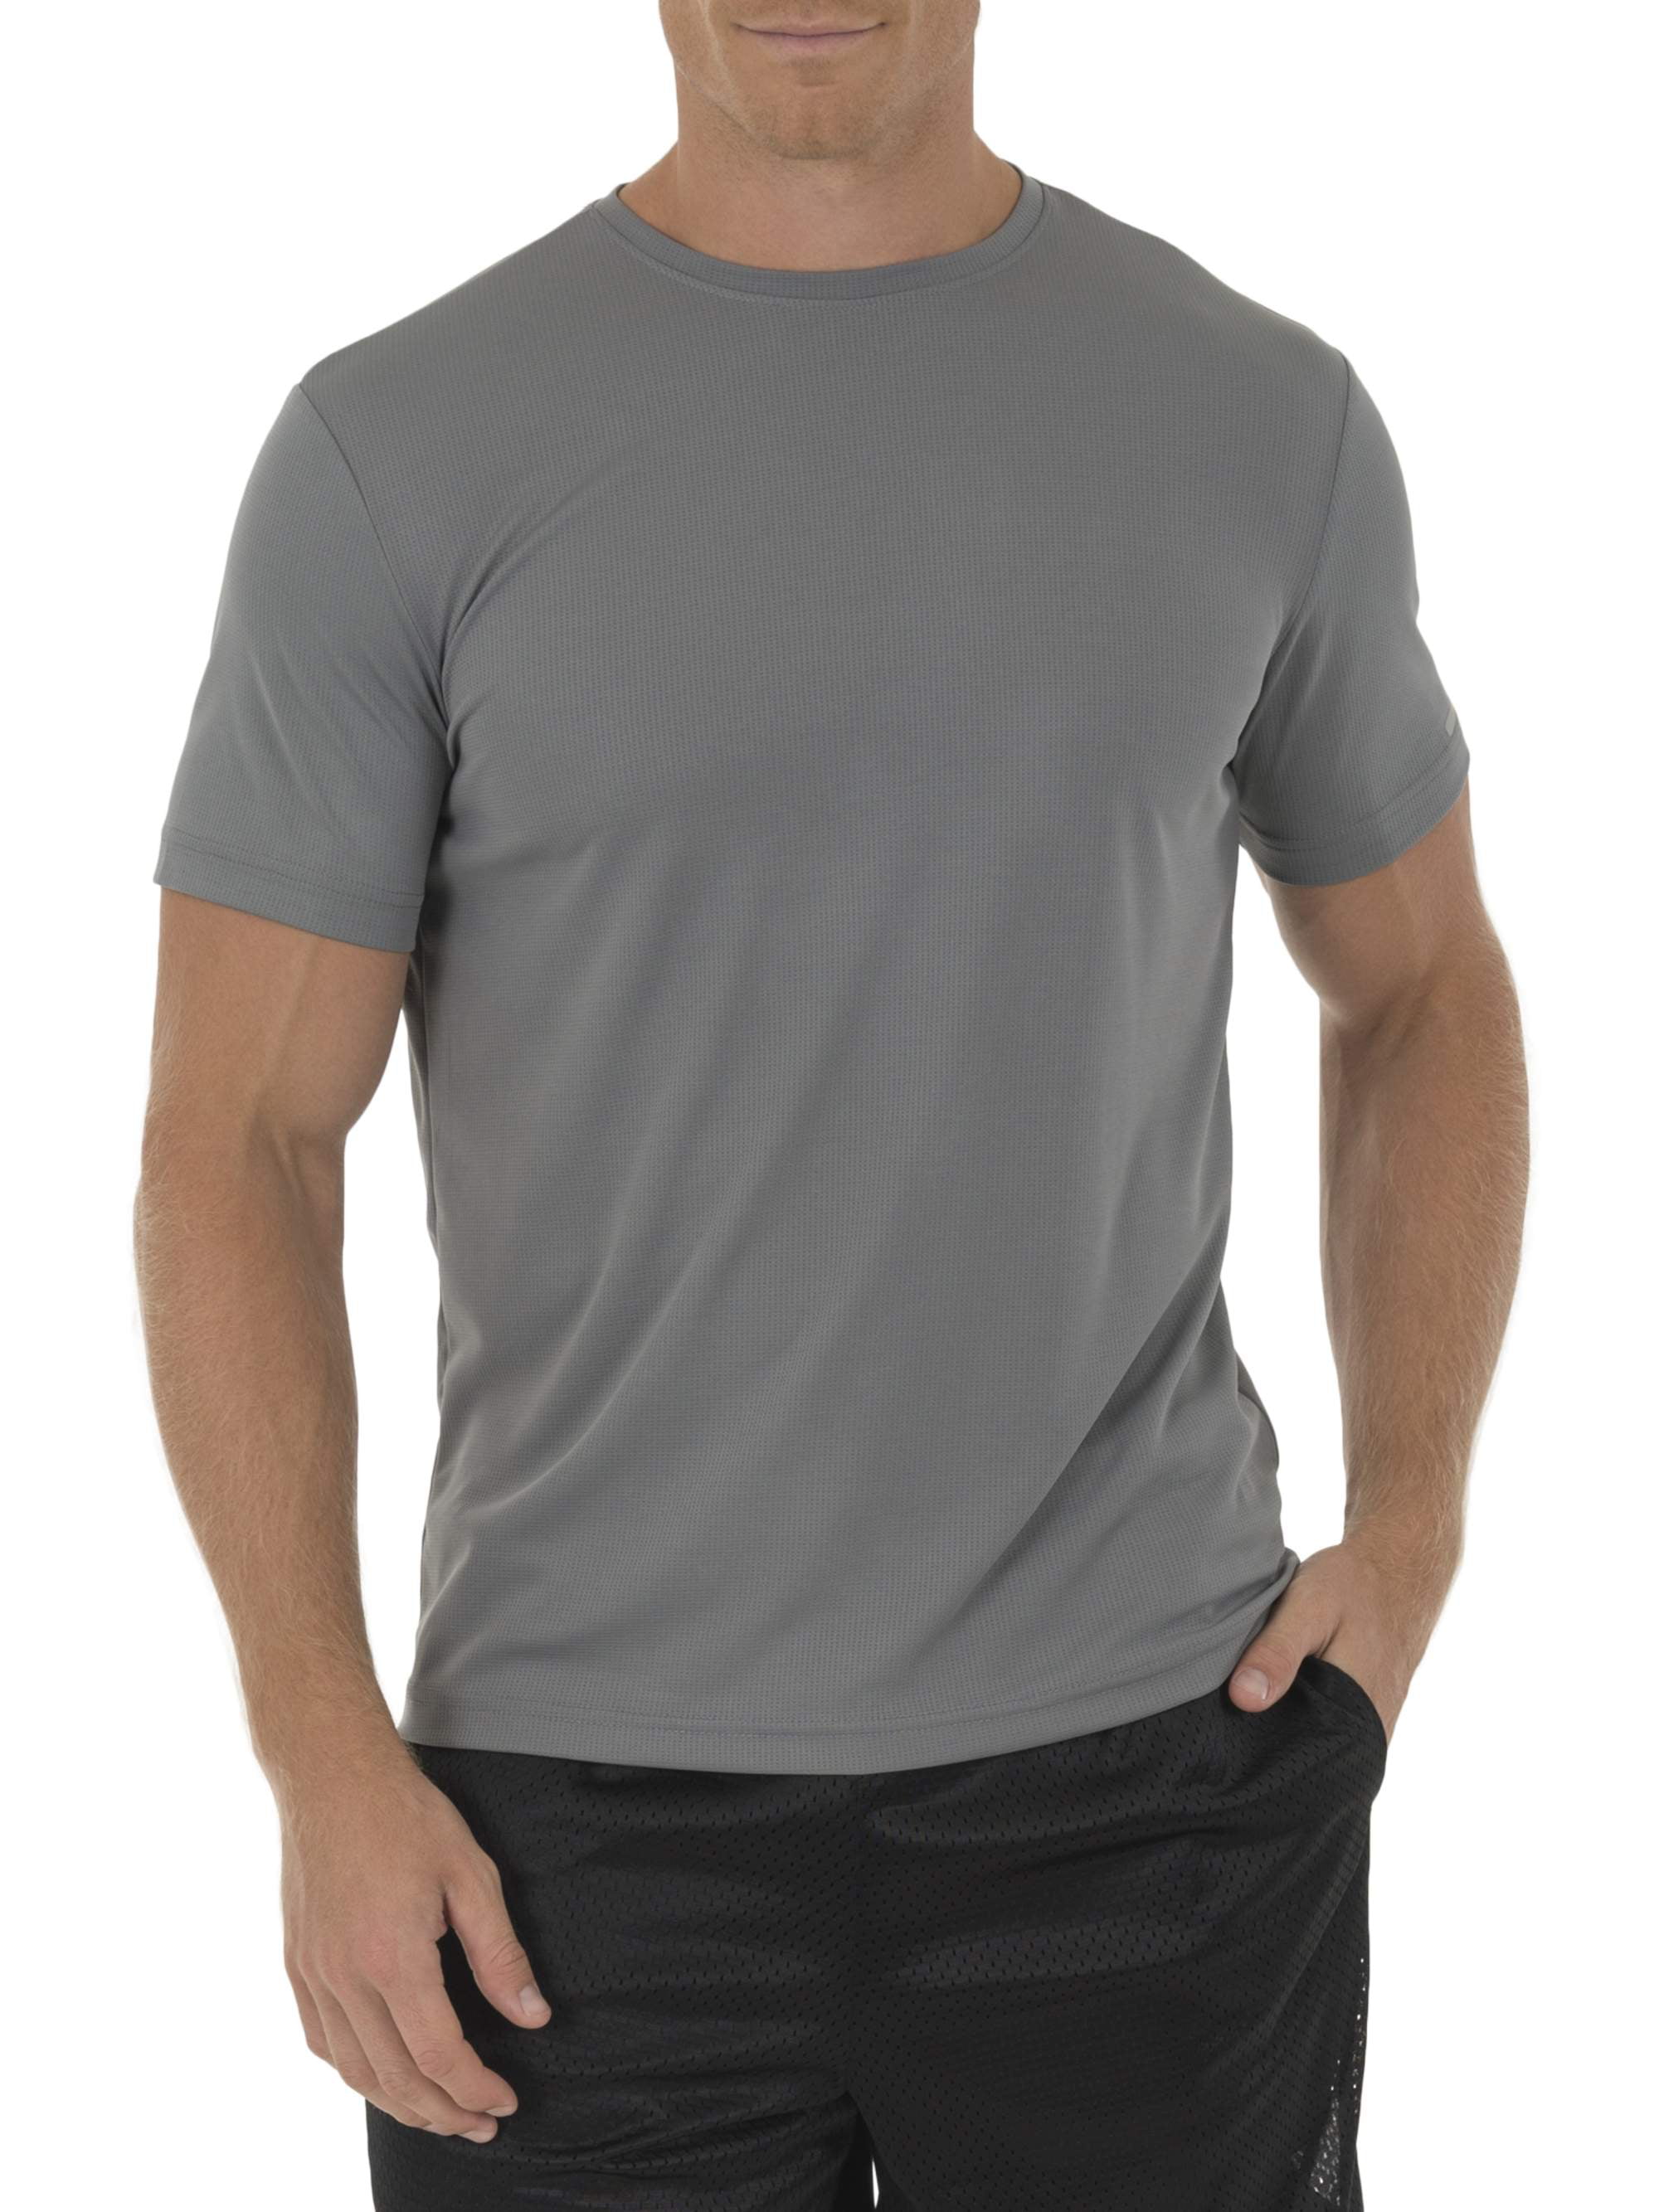 athletic regular fit quick dry tee